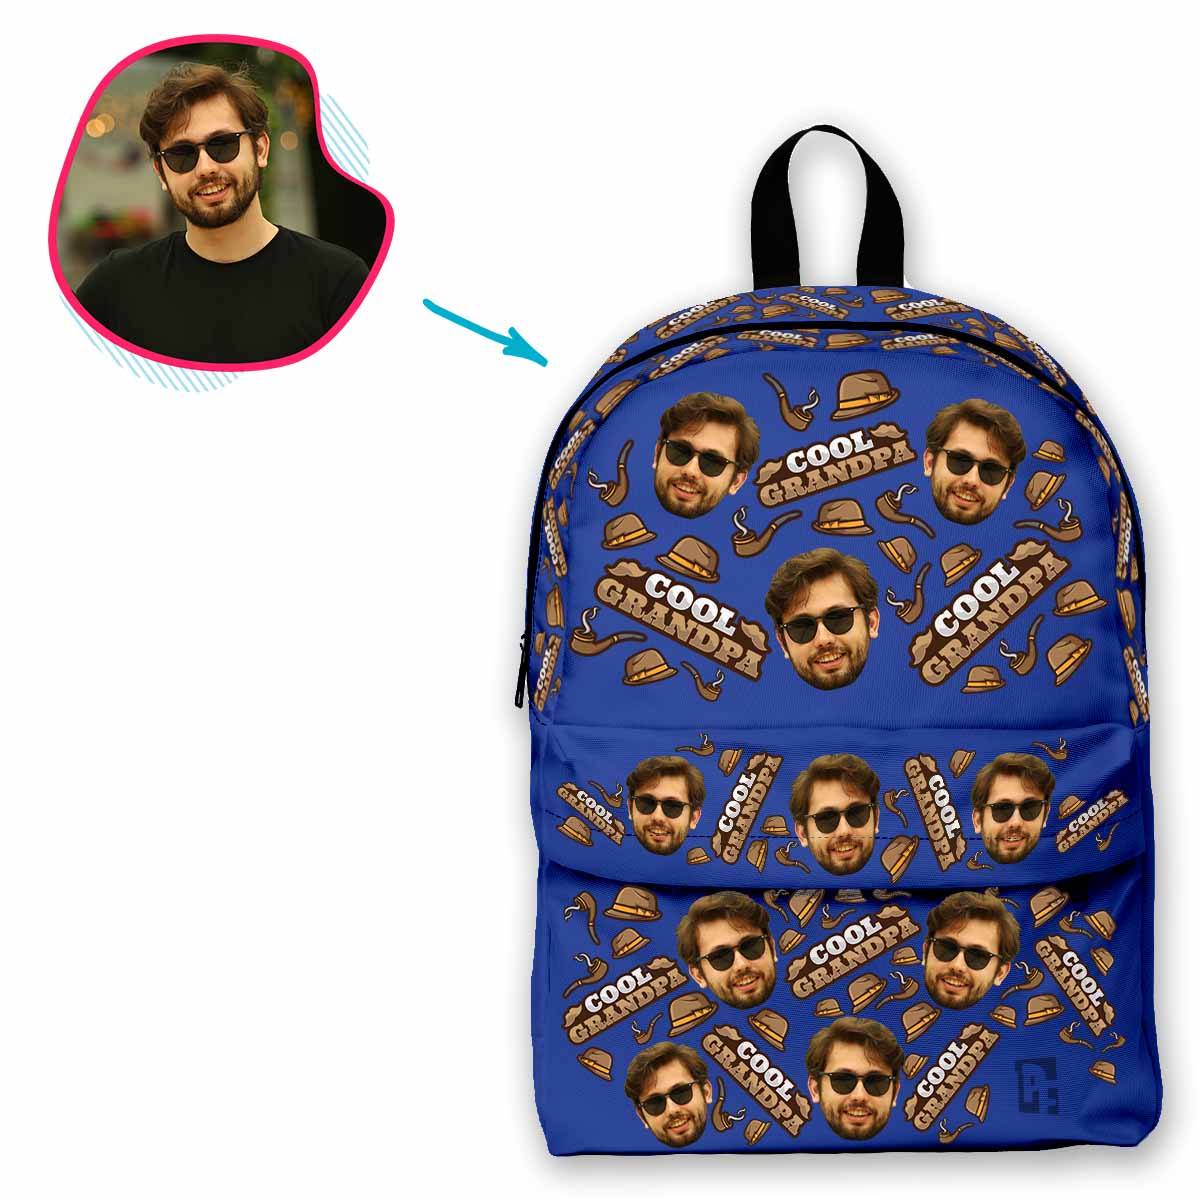 darkblue Cool Grandfather classic backpack personalized with photo of face printed on it